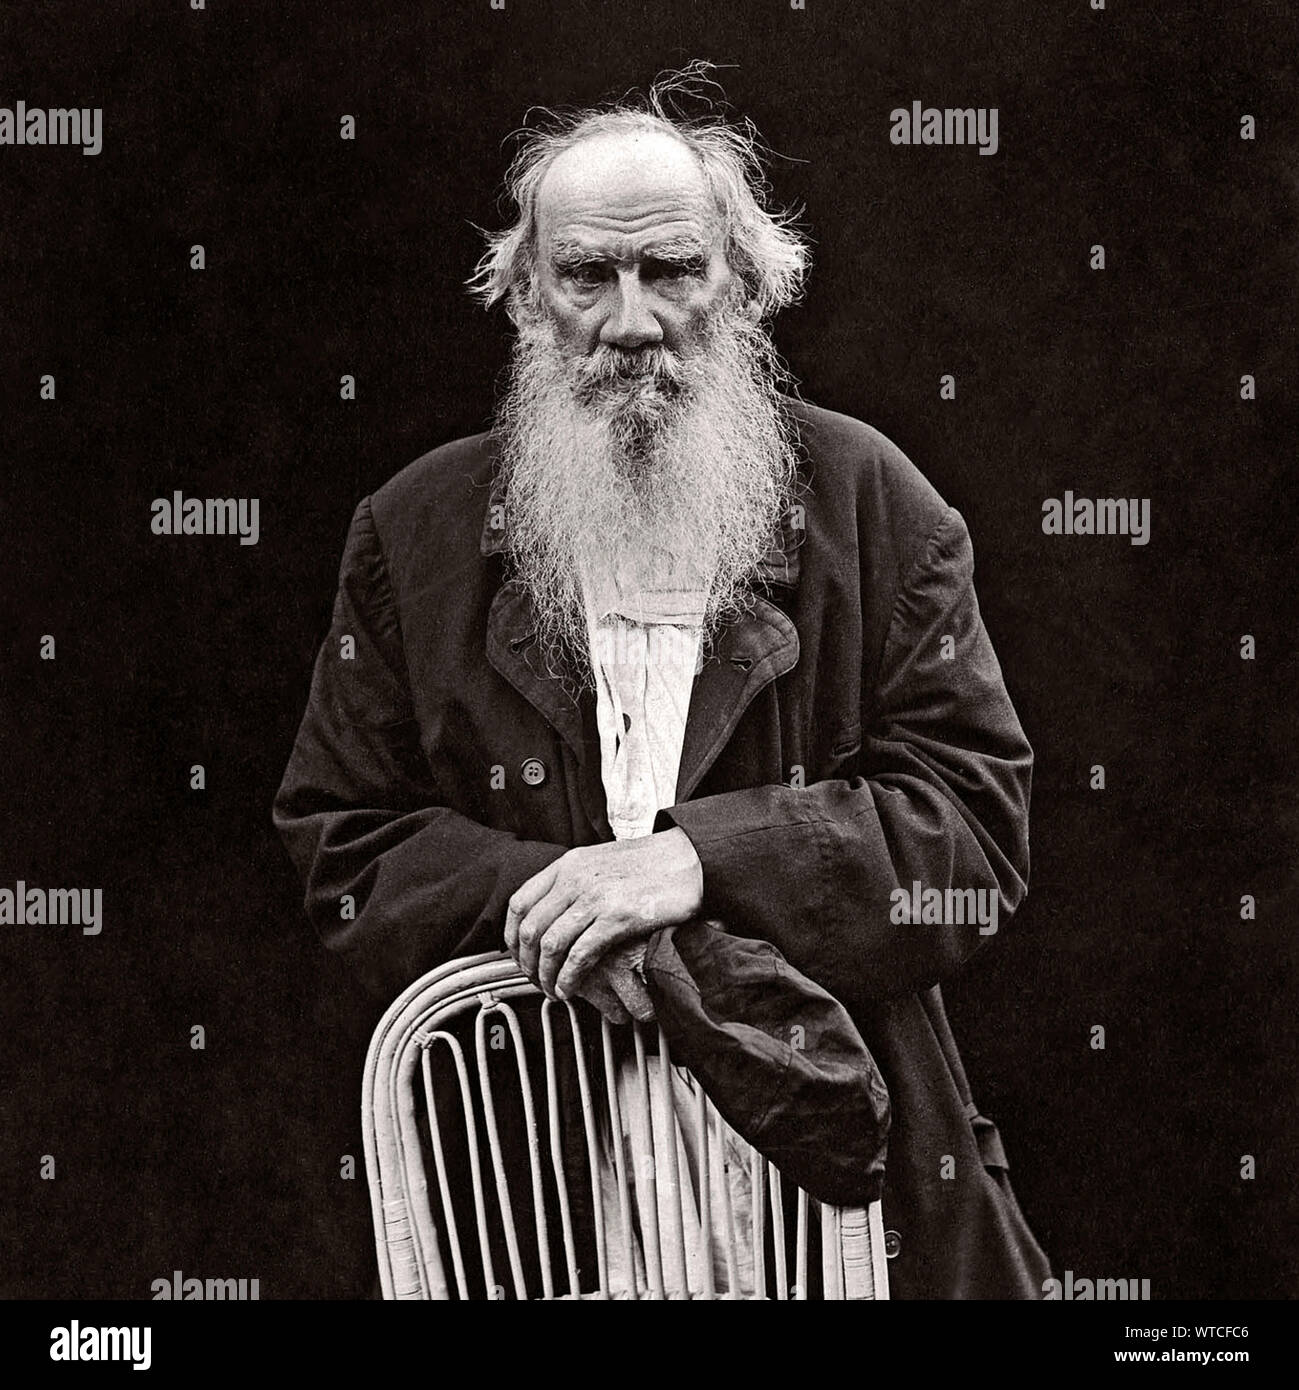 Count Leo Tolstoy (1828 – 1910) was a Russian writer who is regarded as one of the greatest authors of all time. He received multiple nominations for Stock Photo